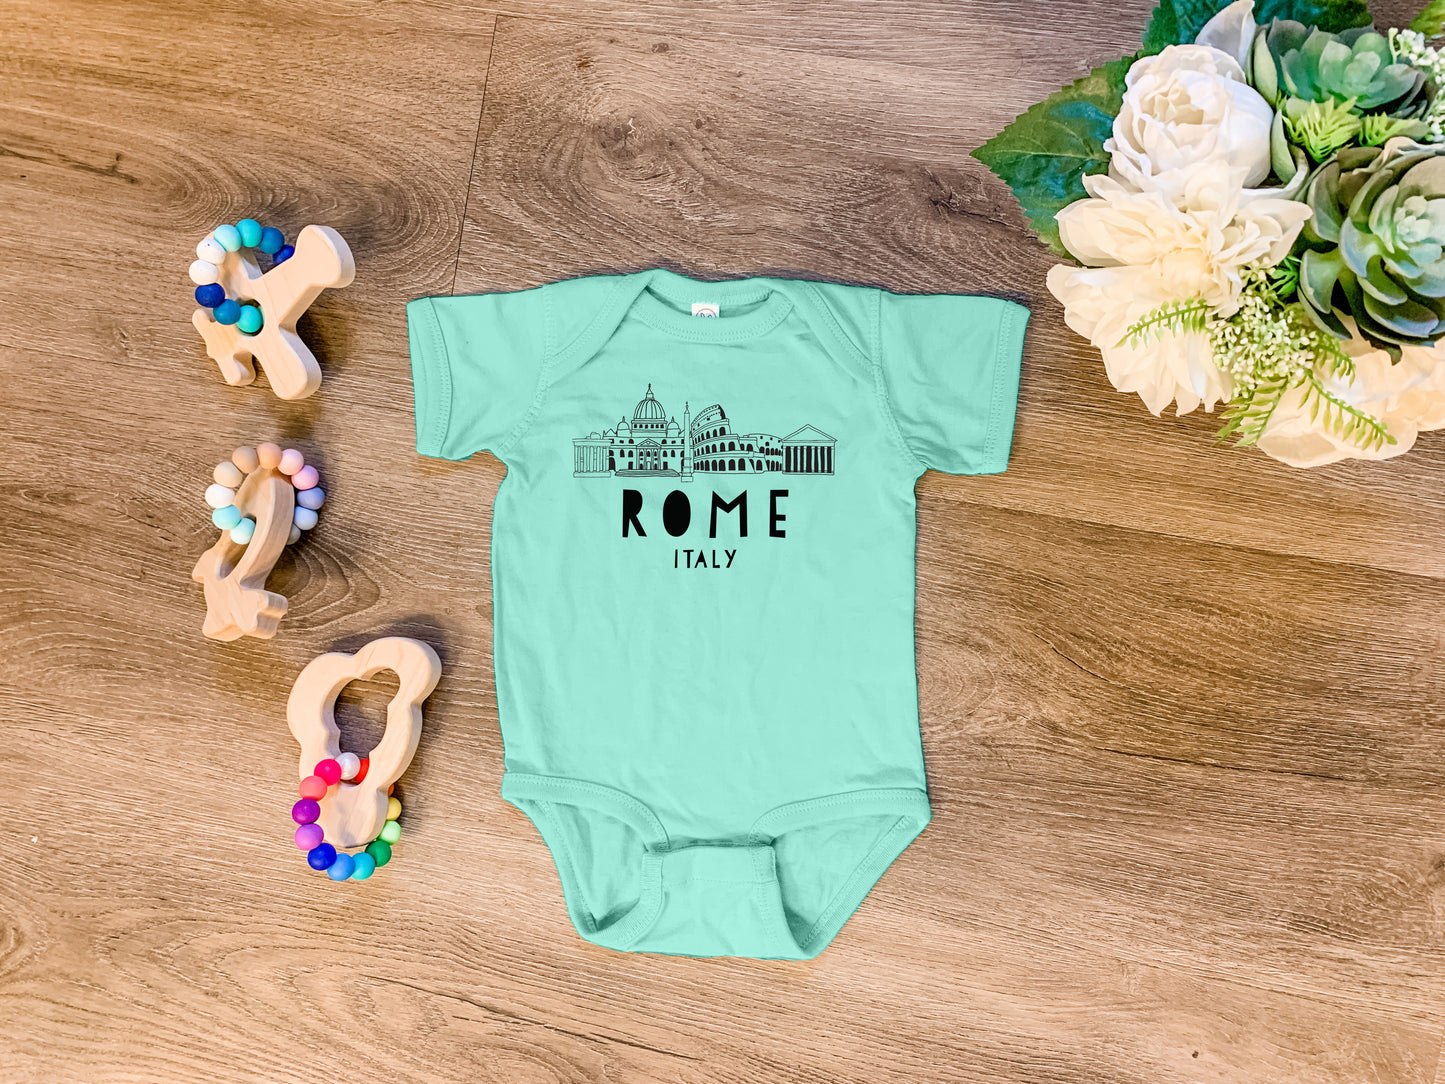 Rome, Italy Skyline - Onesie - Heather Gray, Chill, or Lavender